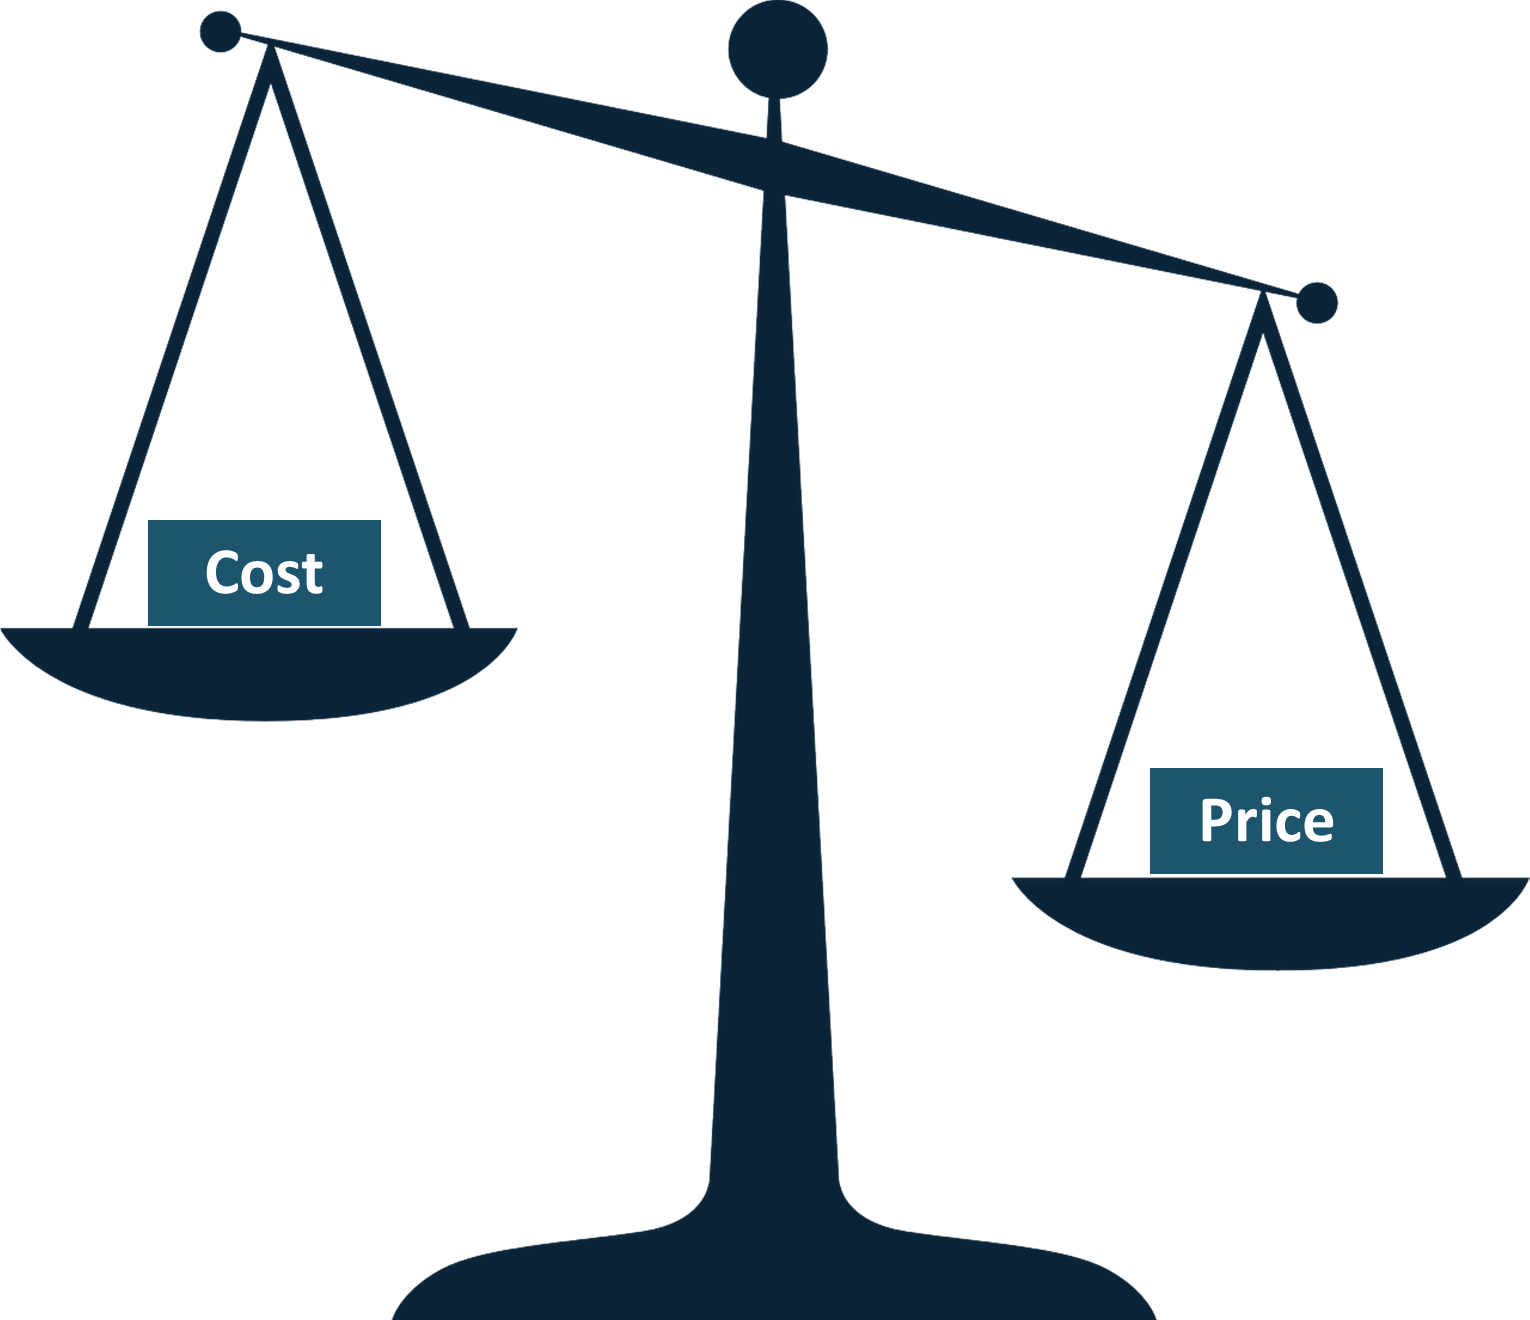 You will pay the "Price" if you don't know the "Cost"!